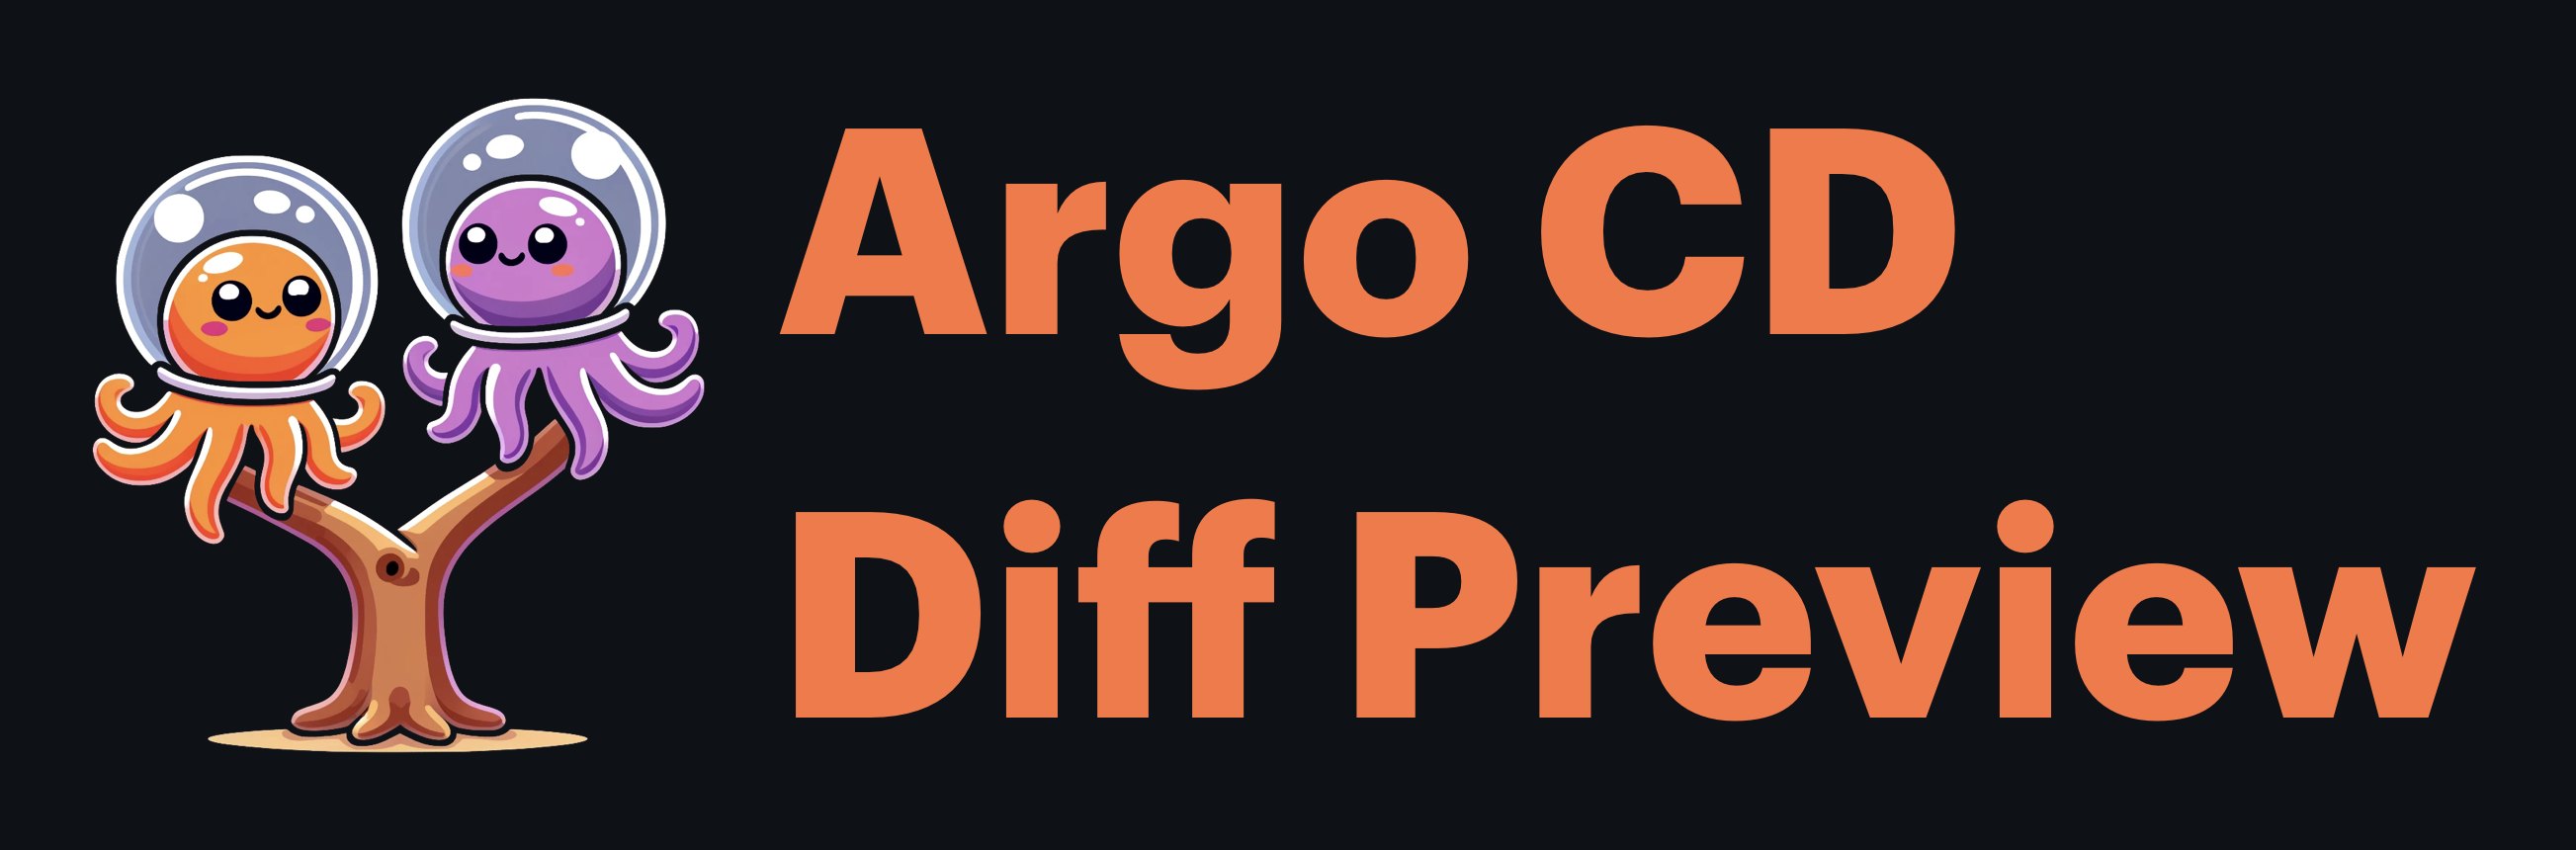 Argo CD Diff Preview